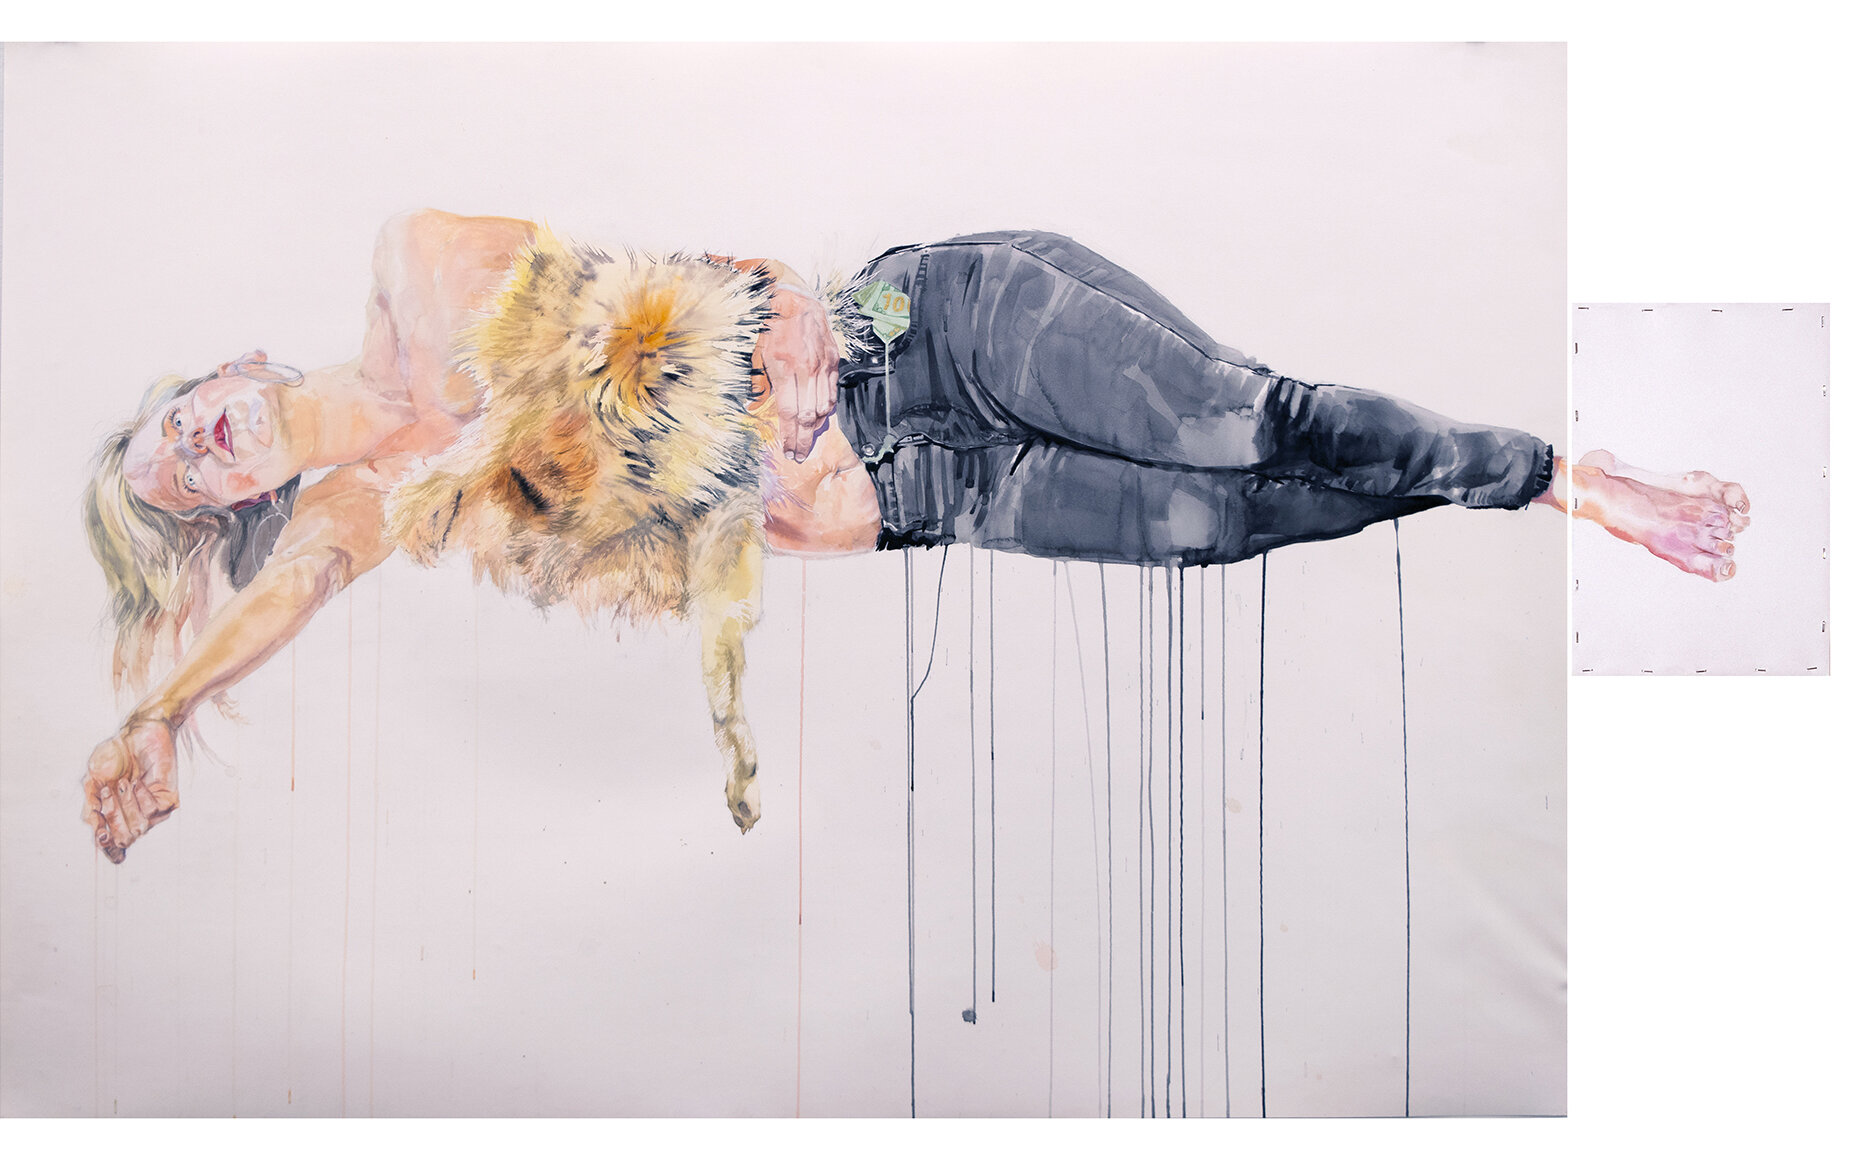 Becca with coyote pelt and $100 bill, watercolor, gouache and imitation gold and silver leaf on paper, 74”x43”, 2017